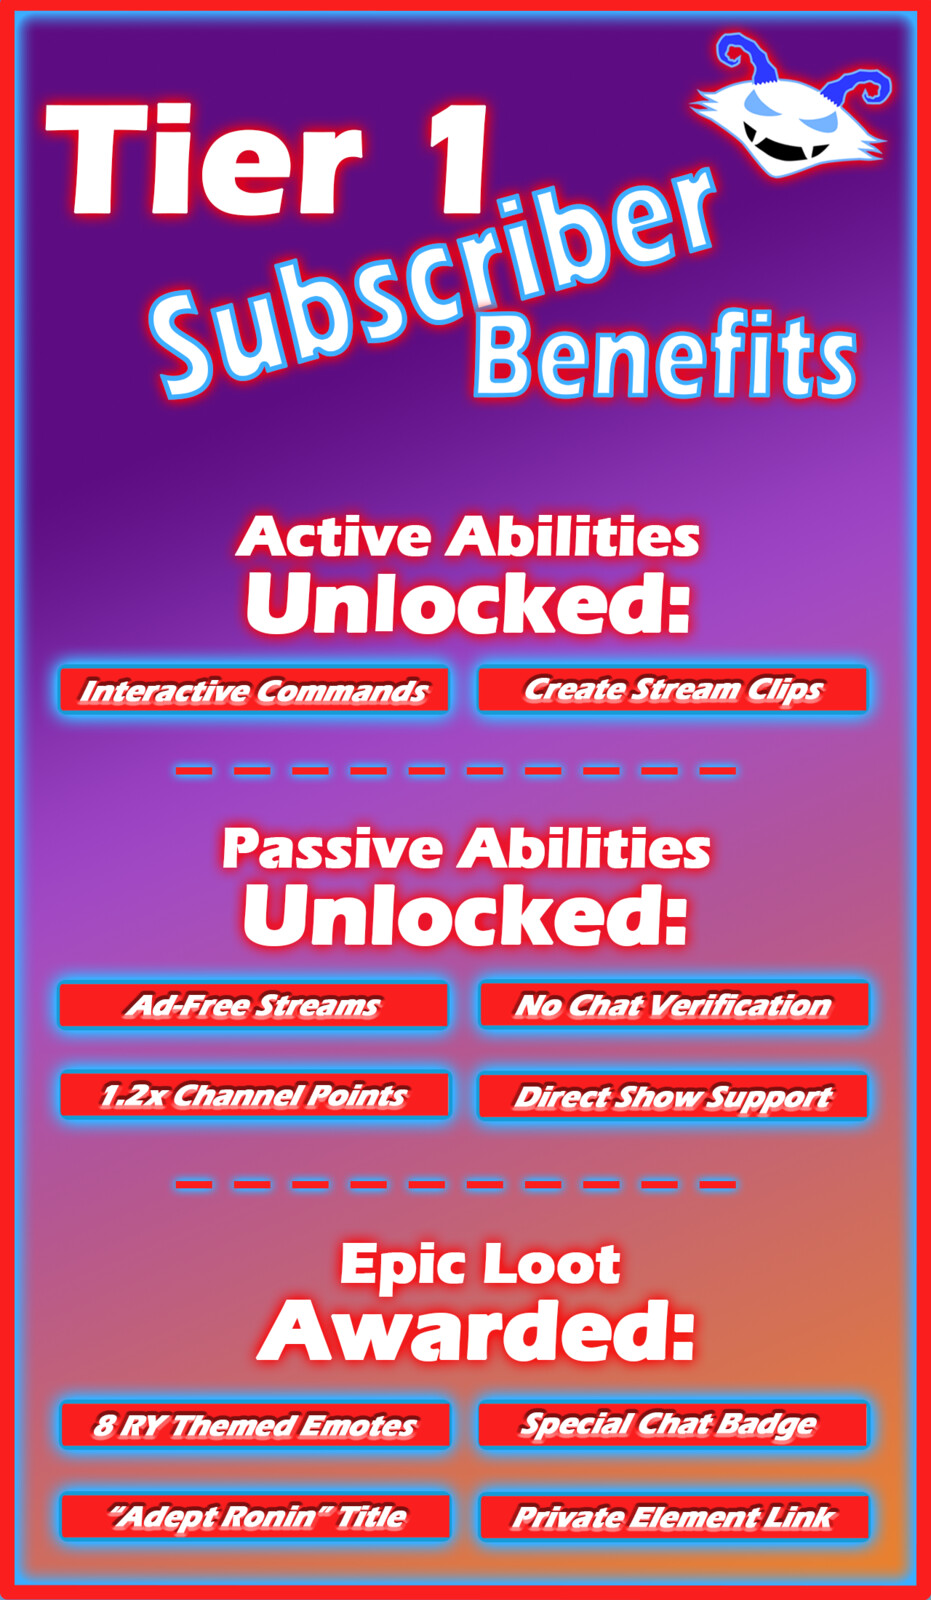 RY Sub Tier 1 Benefits About Panel